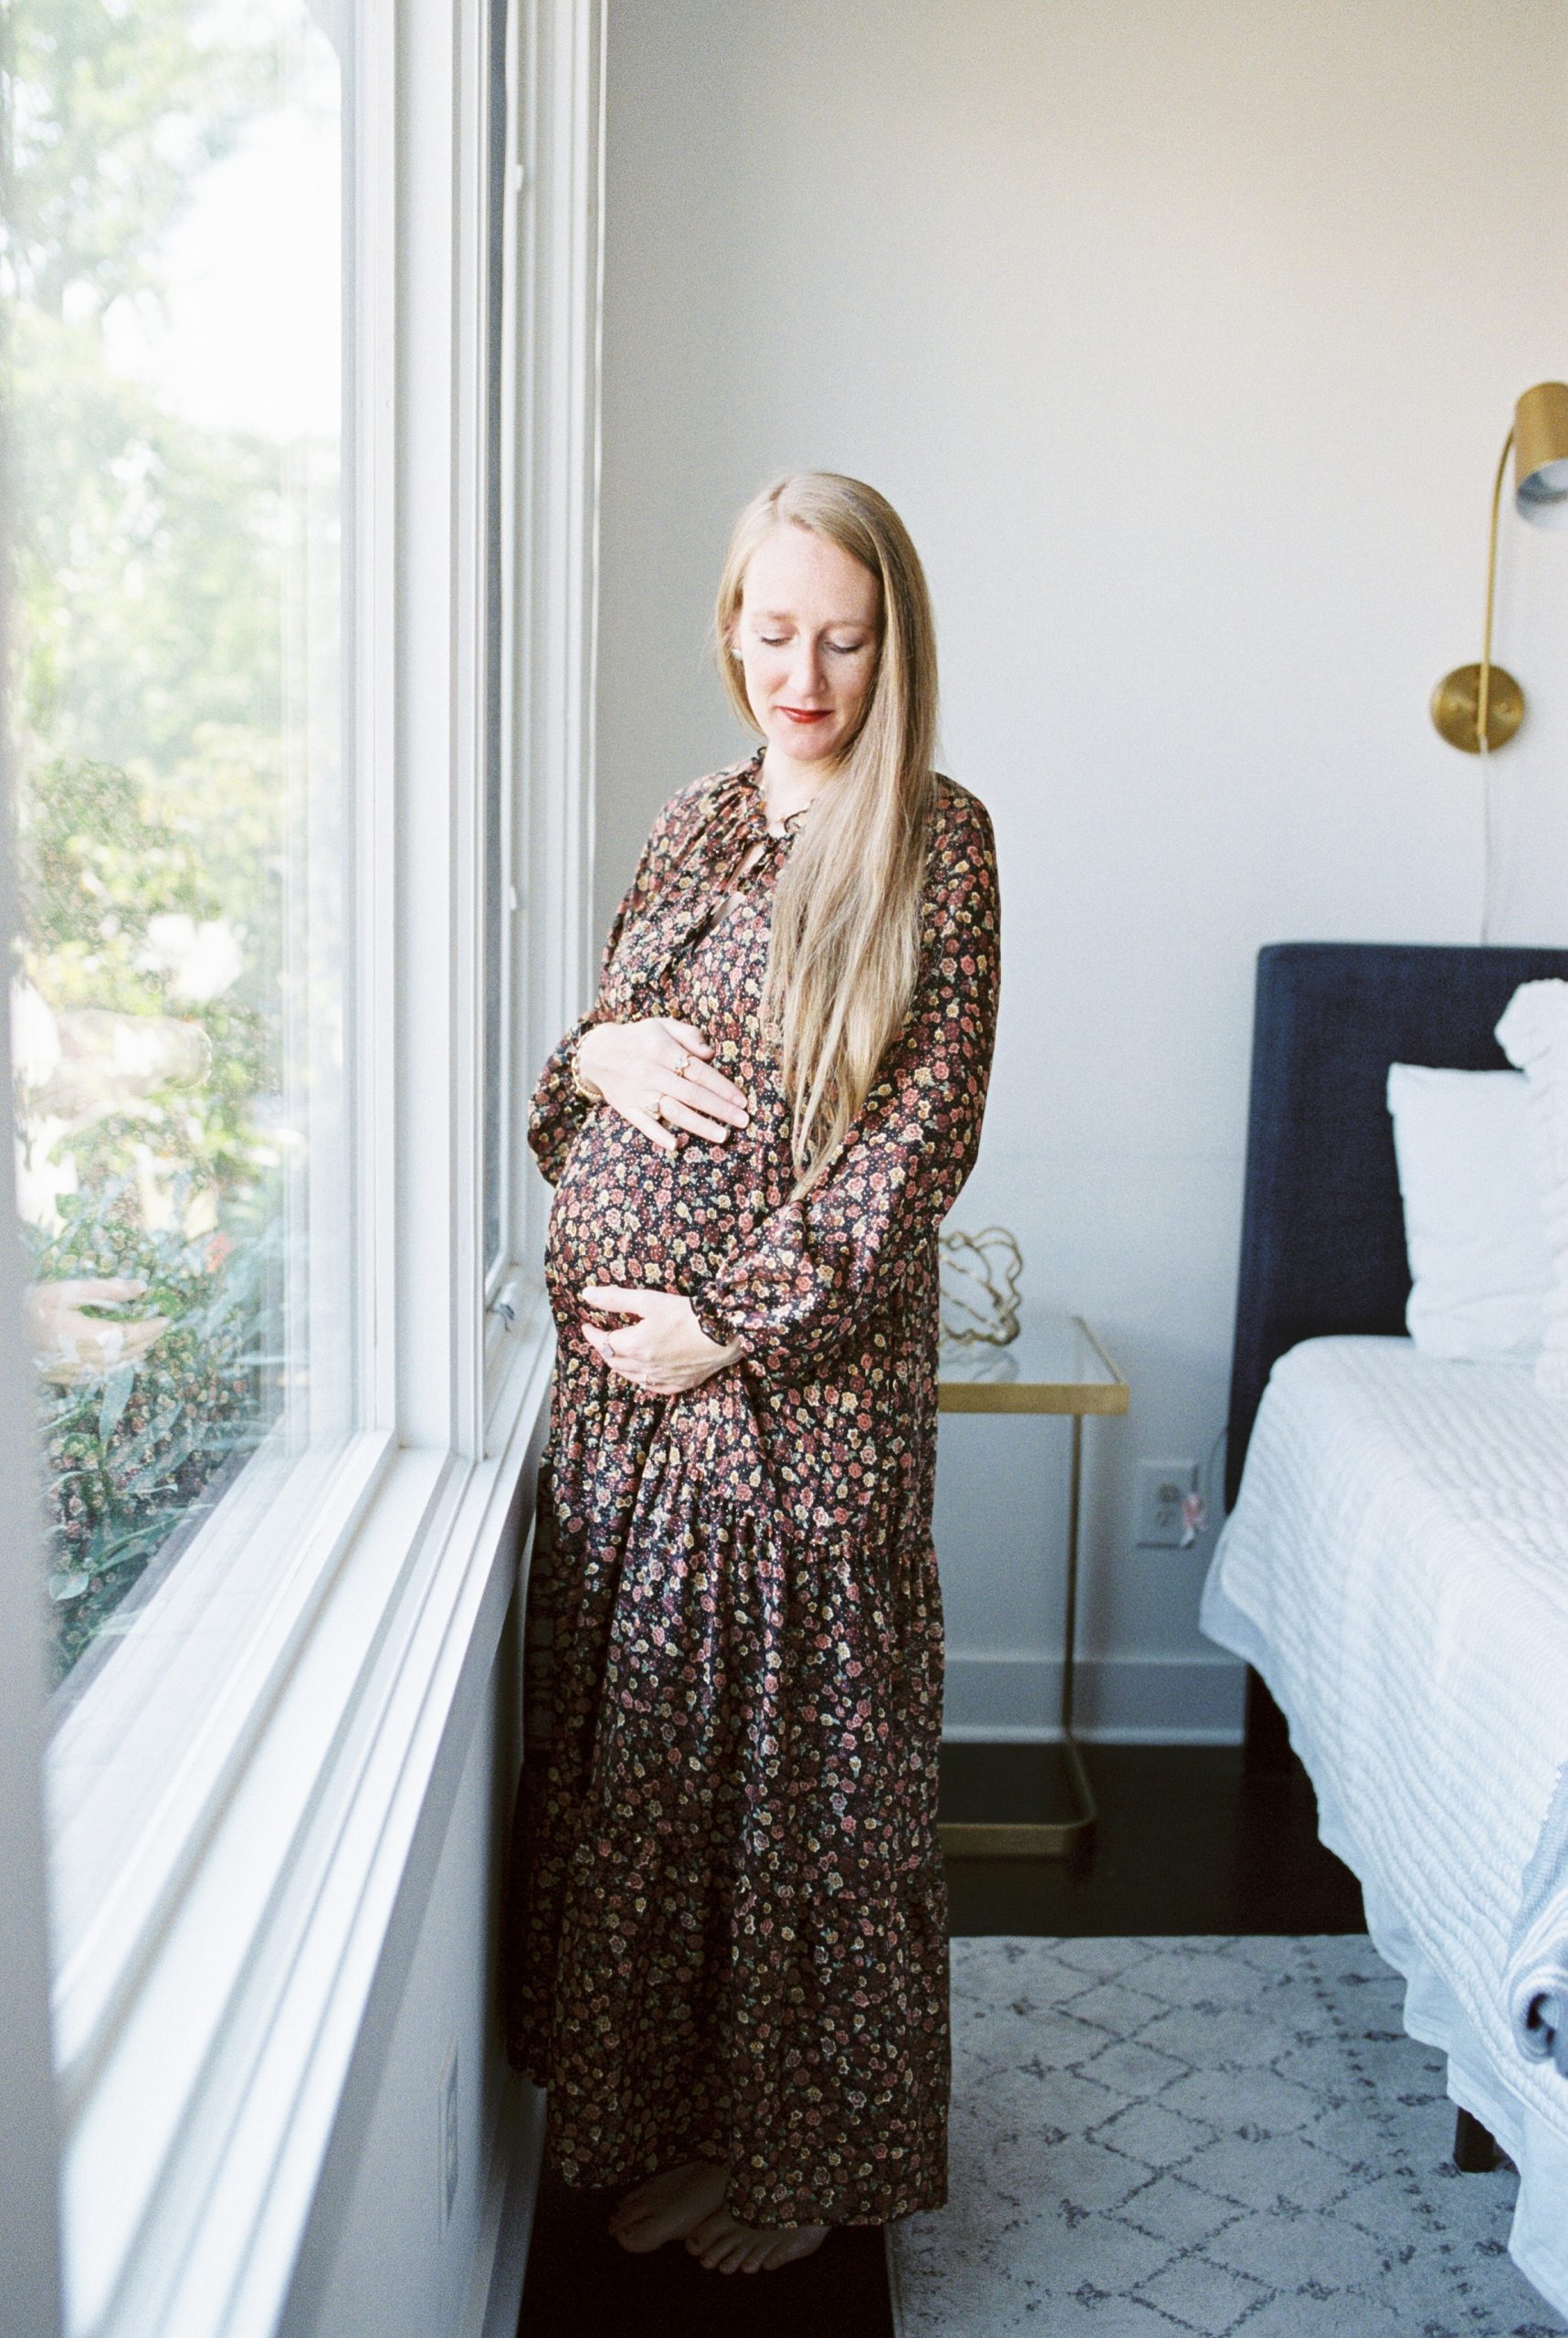 expectant mom standing next to window posing for maternity photos